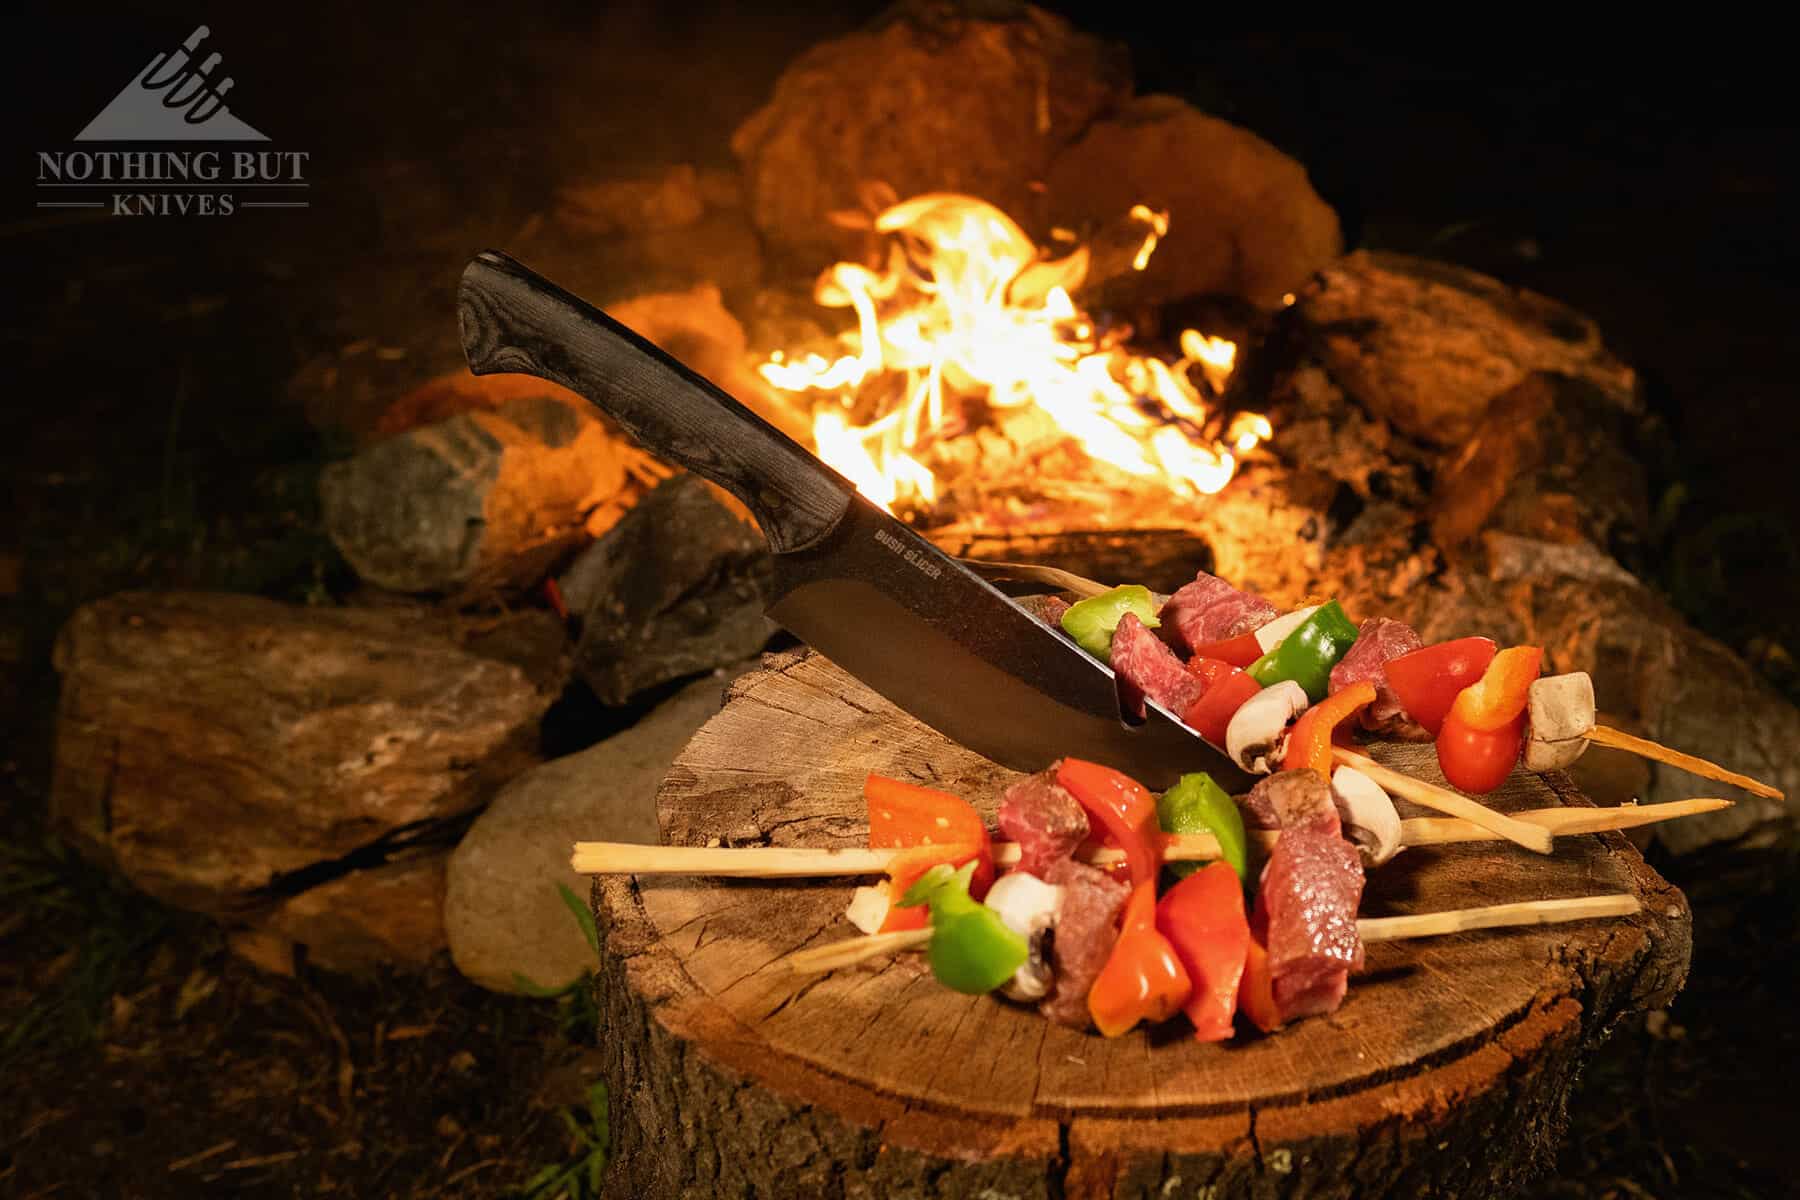 The Bush Slicer performed quite well as a camp fire food prep knife.